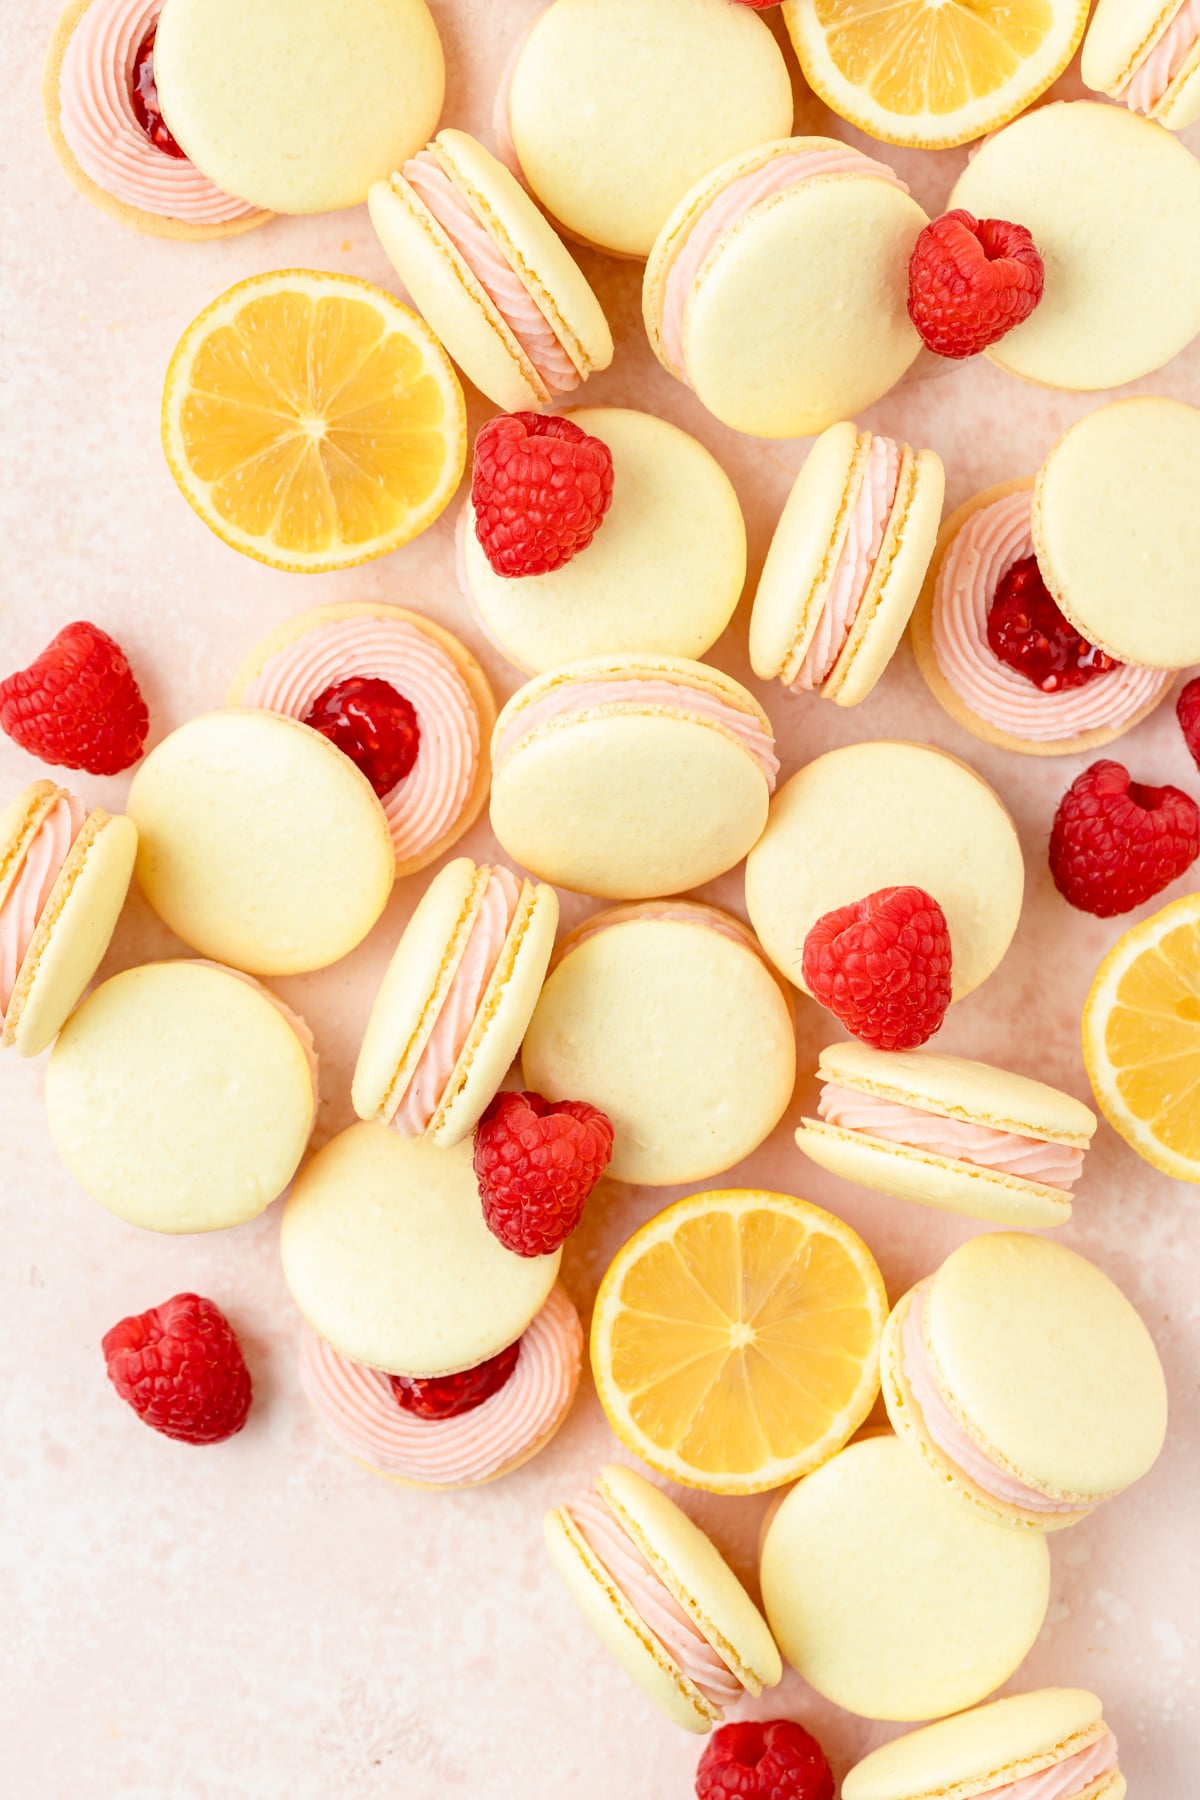 lemon macarons with raspberry filling and mascarpone frosting.